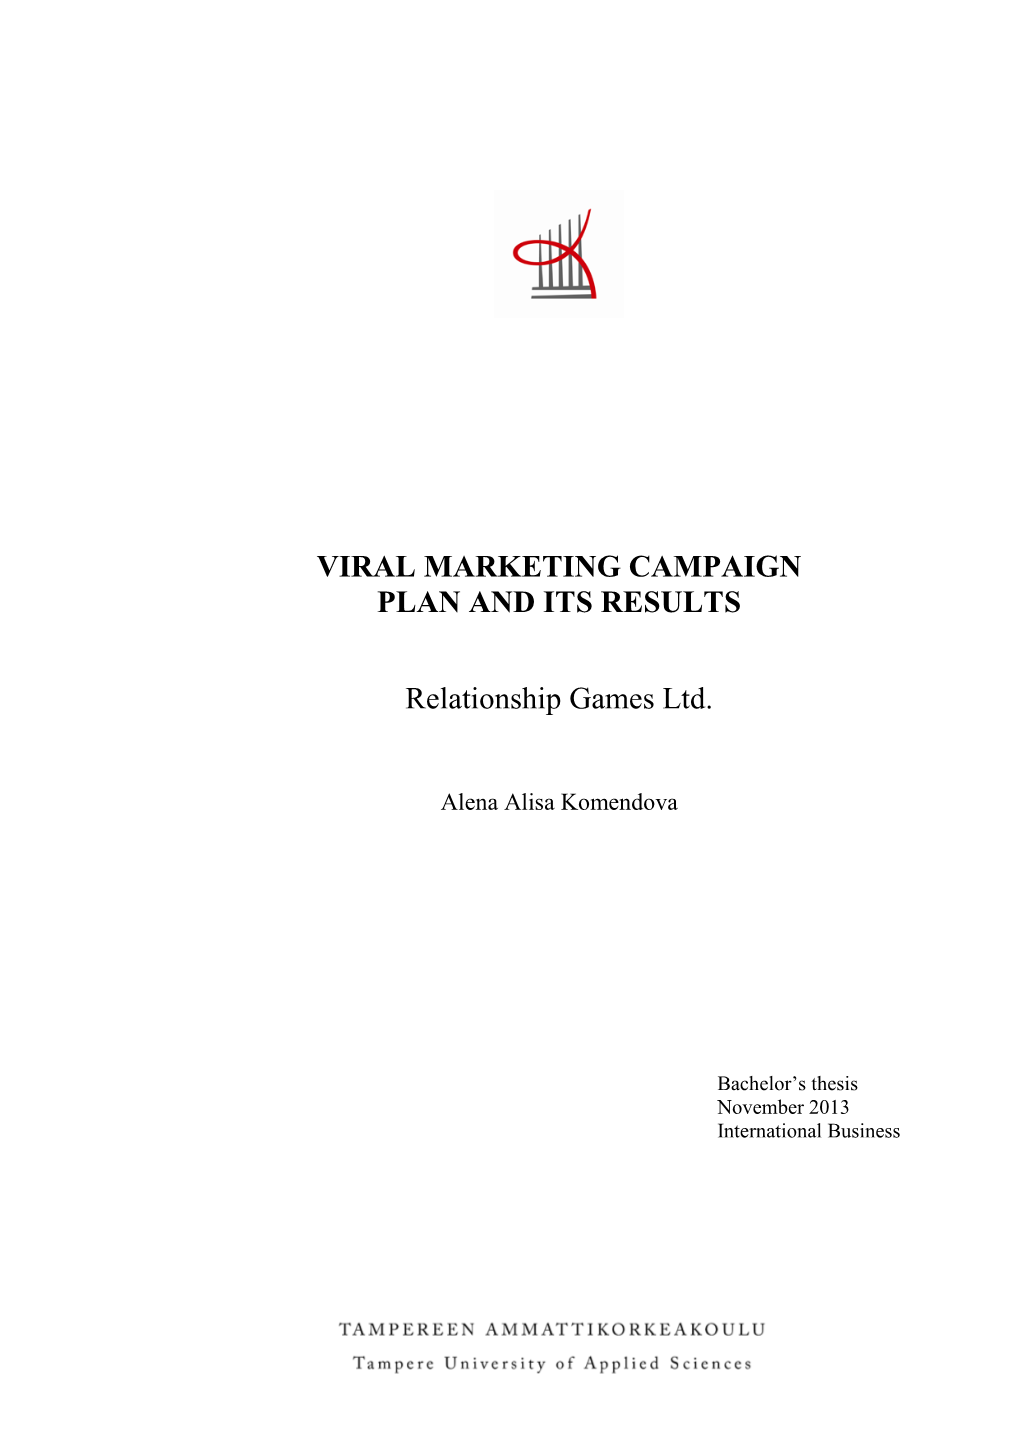 Viral Marketing Campaign Plan and Its Results